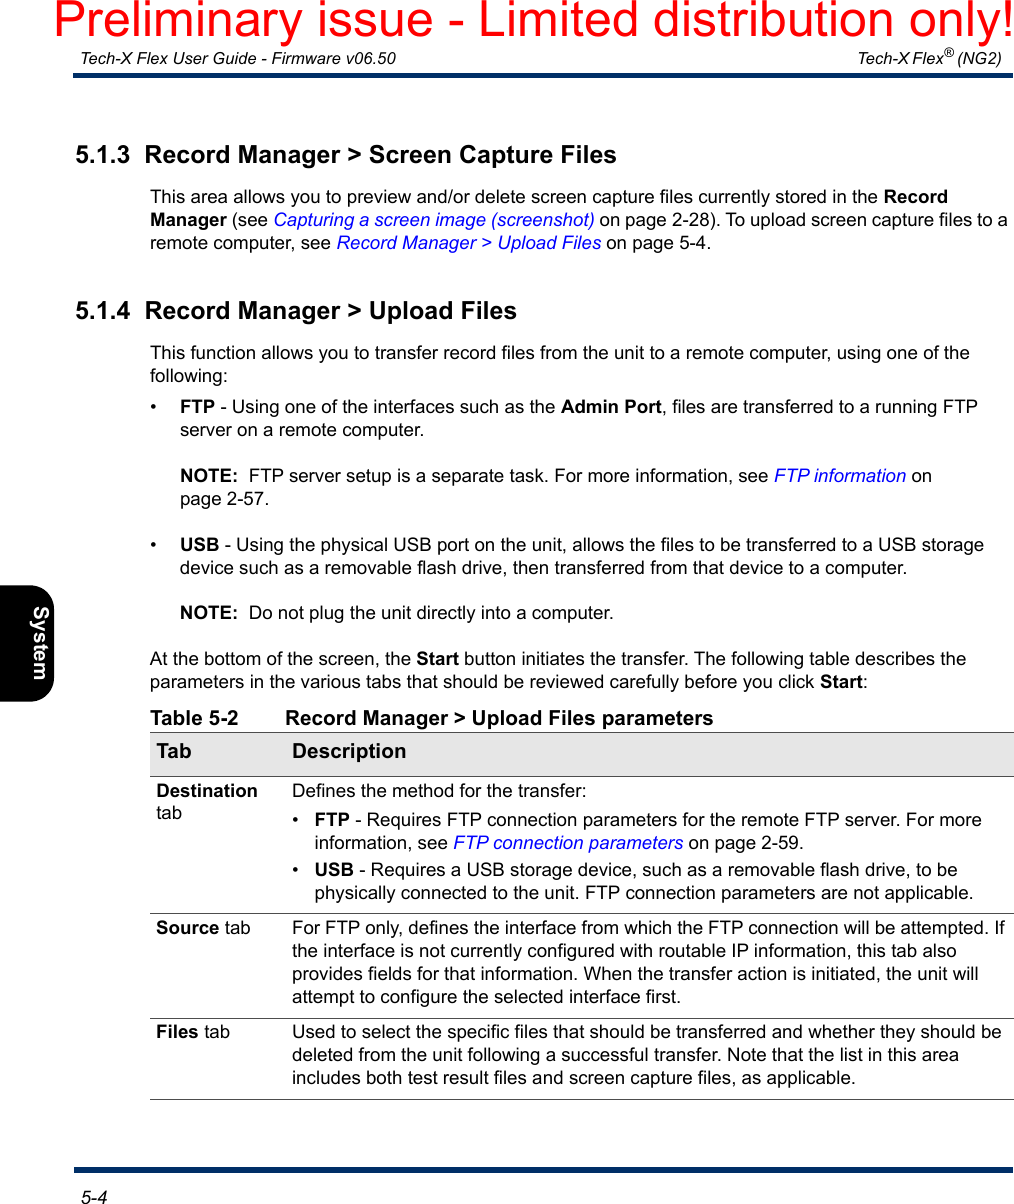  Tech-X Flex User Guide - Firmware v06.50   Tech-X Flex® (NG2)  5-4Intro Overview Wi-Fi Ethernet System IP/Video MoCA RF Specs5.1.3  Record Manager &gt; Screen Capture FilesThis area allows you to preview and/or delete screen capture files currently stored in the Record Manager (see Capturing a screen image (screenshot) on page 2-28). To upload screen capture files to a remote computer, see Record Manager &gt; Upload Files on page 5-4.5.1.4  Record Manager &gt; Upload FilesThis function allows you to transfer record files from the unit to a remote computer, using one of the following:•FTP - Using one of the interfaces such as the Admin Port, files are transferred to a running FTP server on a remote computer.NOTE:  FTP server setup is a separate task. For more information, see FTP information on page 2-57.•USB - Using the physical USB port on the unit, allows the files to be transferred to a USB storage device such as a removable flash drive, then transferred from that device to a computer. NOTE:  Do not plug the unit directly into a computer.At the bottom of the screen, the Start button initiates the transfer. The following table describes the parameters in the various tabs that should be reviewed carefully before you click Start:Table 5-2 Record Manager &gt; Upload Files parametersTab DescriptionDestination tabDefines the method for the transfer:•FTP - Requires FTP connection parameters for the remote FTP server. For more information, see FTP connection parameters on page 2-59.•USB - Requires a USB storage device, such as a removable flash drive, to be physically connected to the unit. FTP connection parameters are not applicable.Source tab For FTP only, defines the interface from which the FTP connection will be attempted. If the interface is not currently configured with routable IP information, this tab also provides fields for that information. When the transfer action is initiated, the unit will attempt to configure the selected interface first.Files tab Used to select the specific files that should be transferred and whether they should be deleted from the unit following a successful transfer. Note that the list in this area includes both test result files and screen capture files, as applicable.Preliminary issue - Limited distribution only!